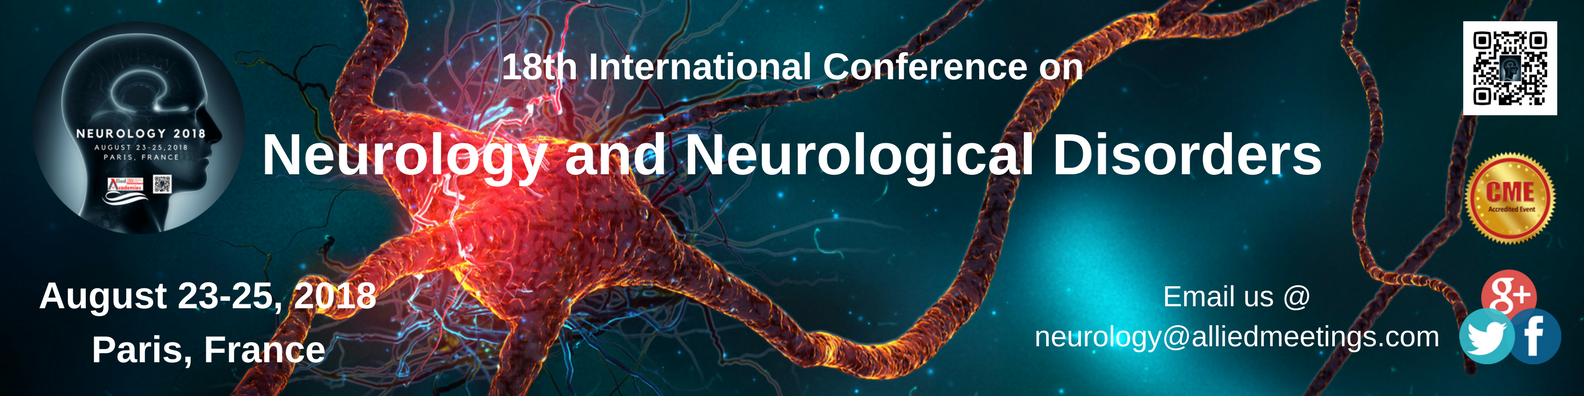 Photos of 18th International Conference on Neurology and Neurological Disorders